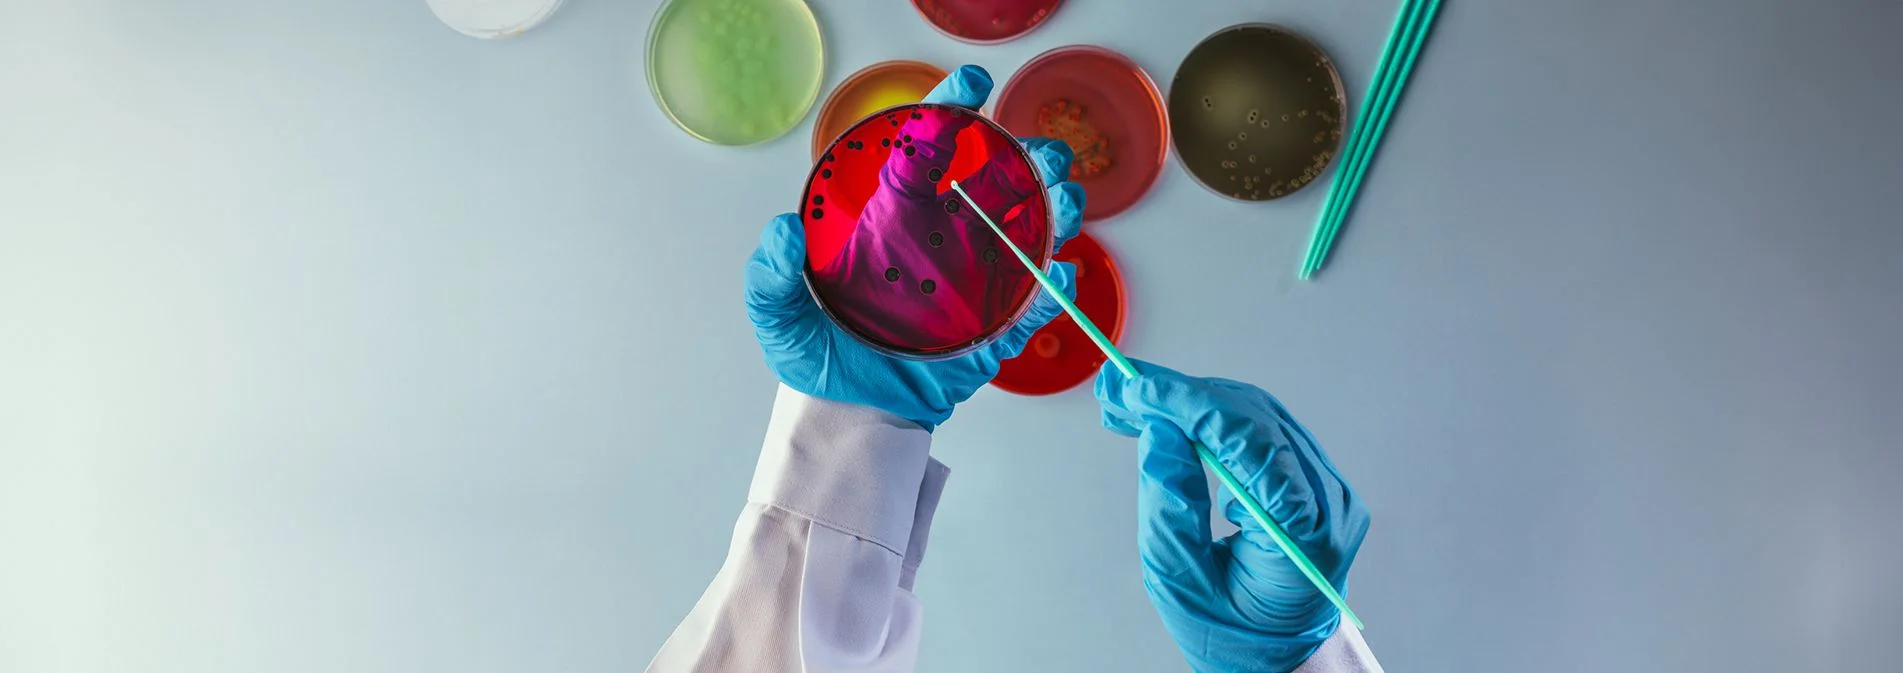 A woman's hands working with petri dishes containing bacteria in a lab.